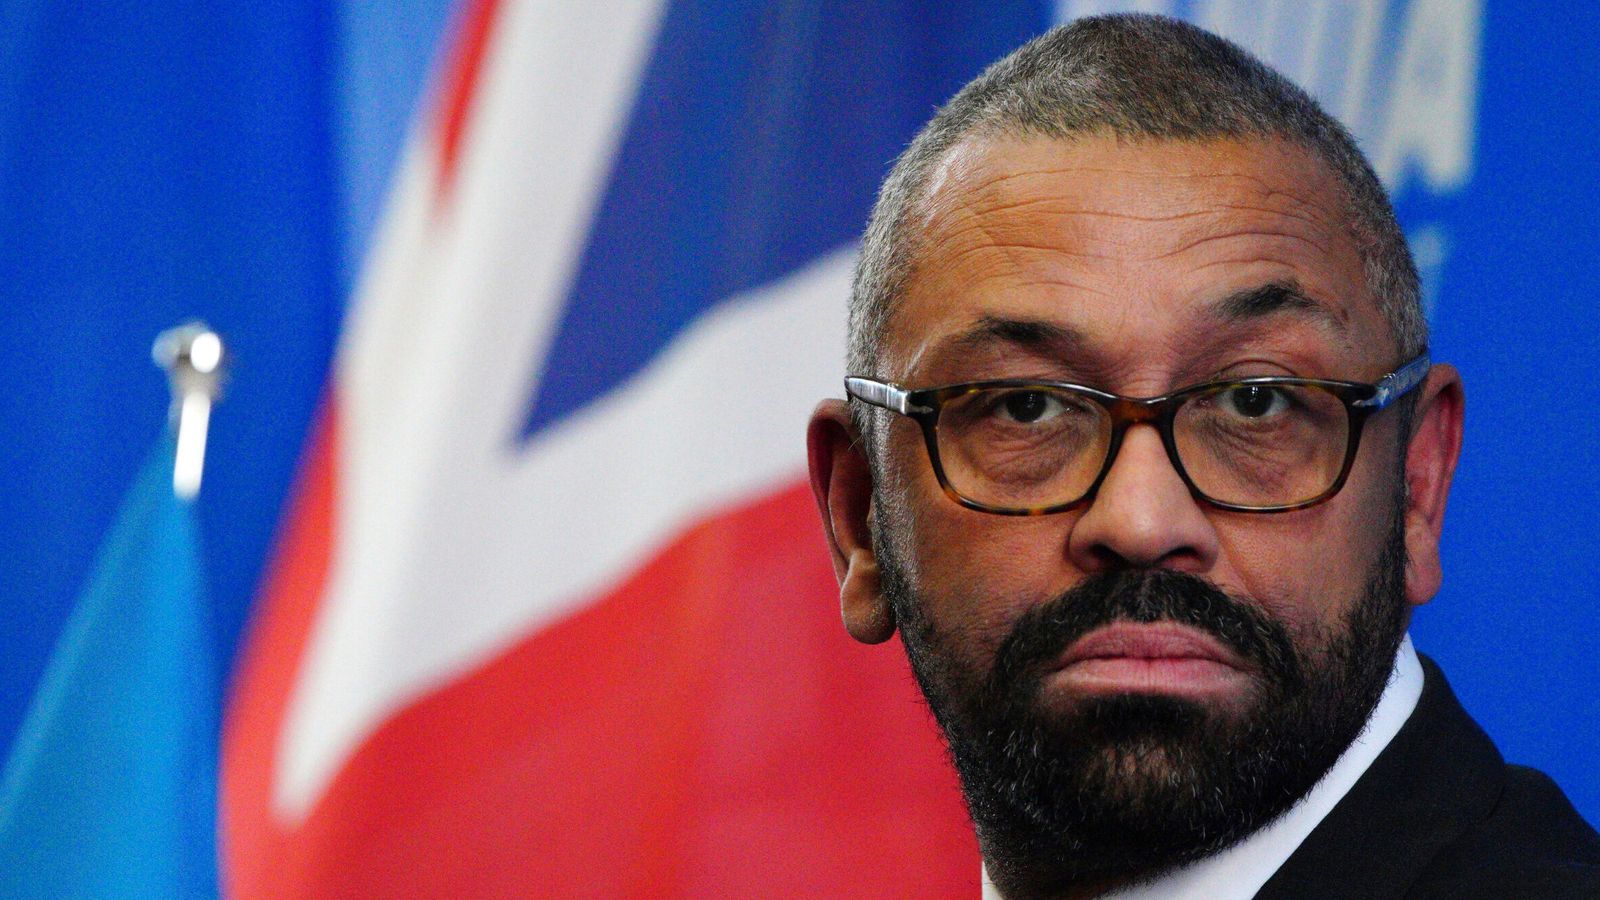 James Cleverly's popularity has plunged - but what do voters in his constituency think?